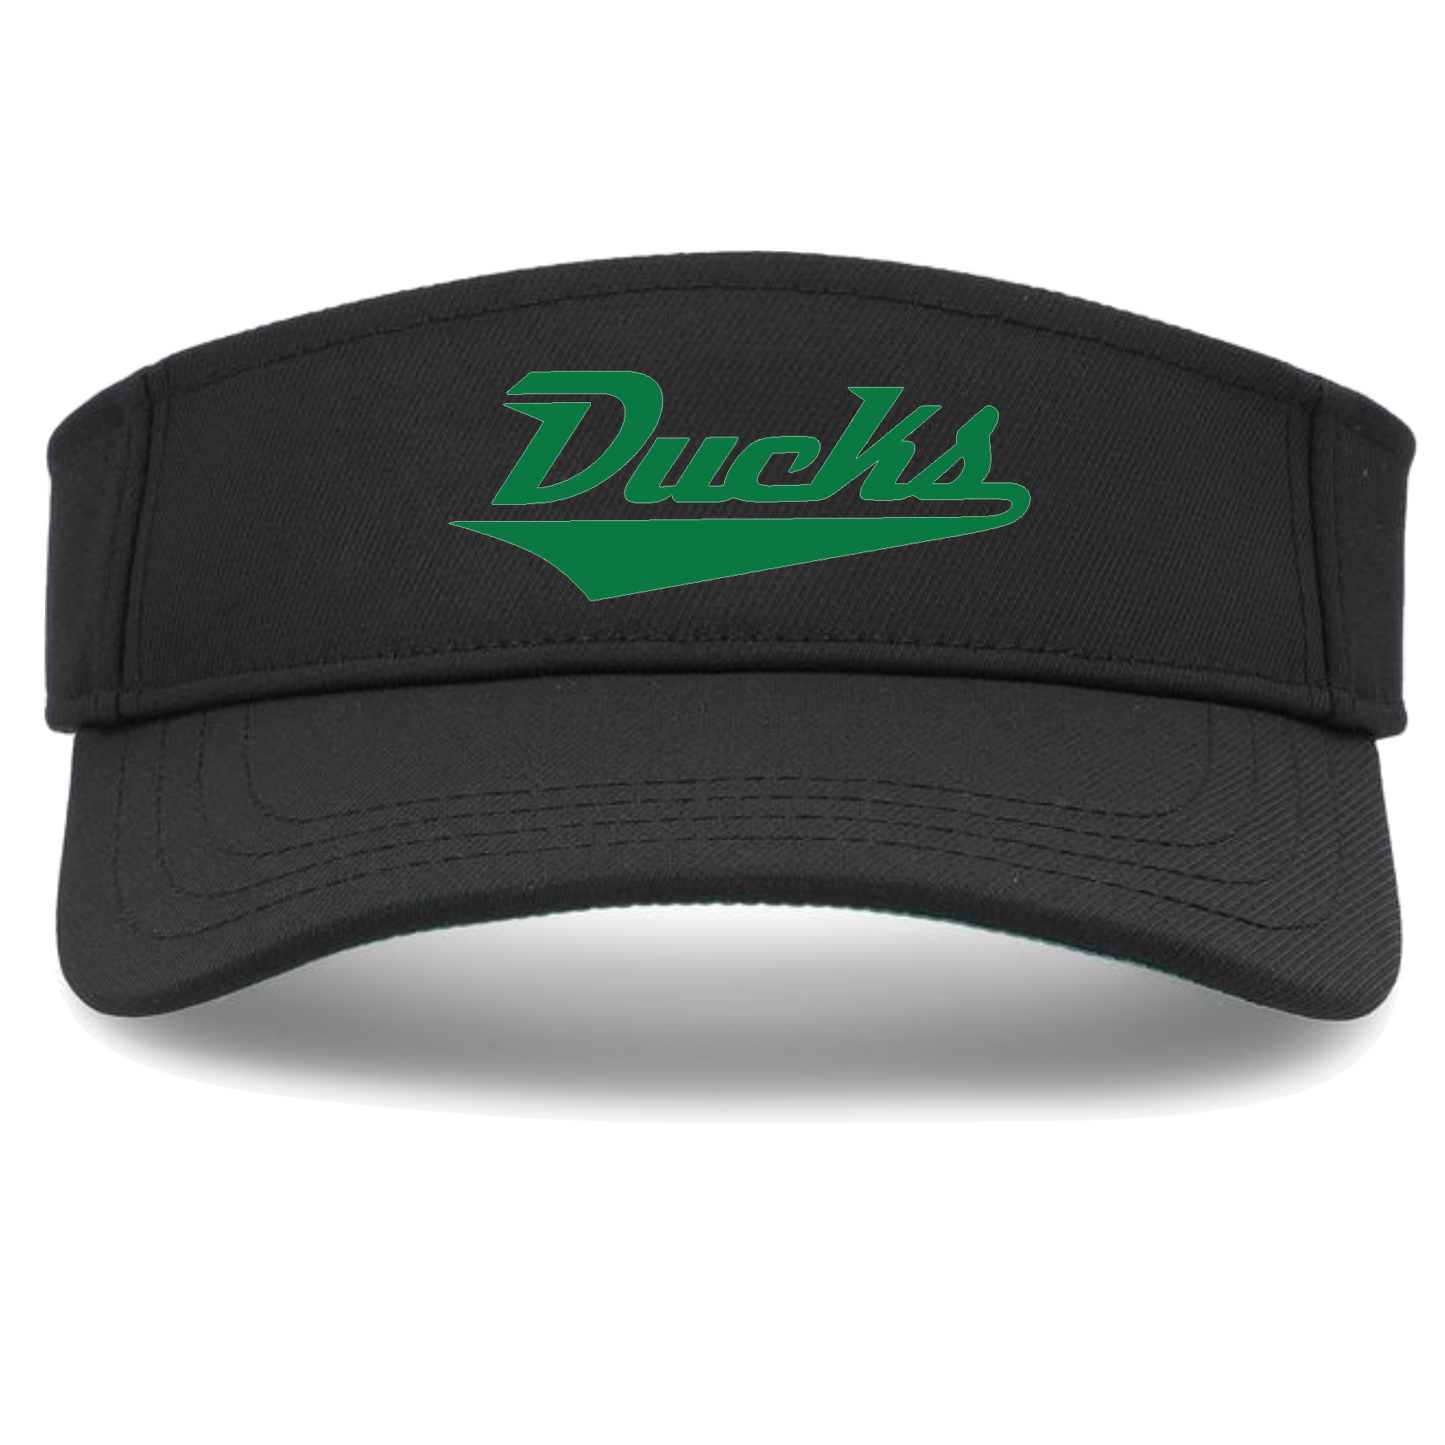 PACIFIC HEADWEAR PERFORATED COOLCORE VISOR